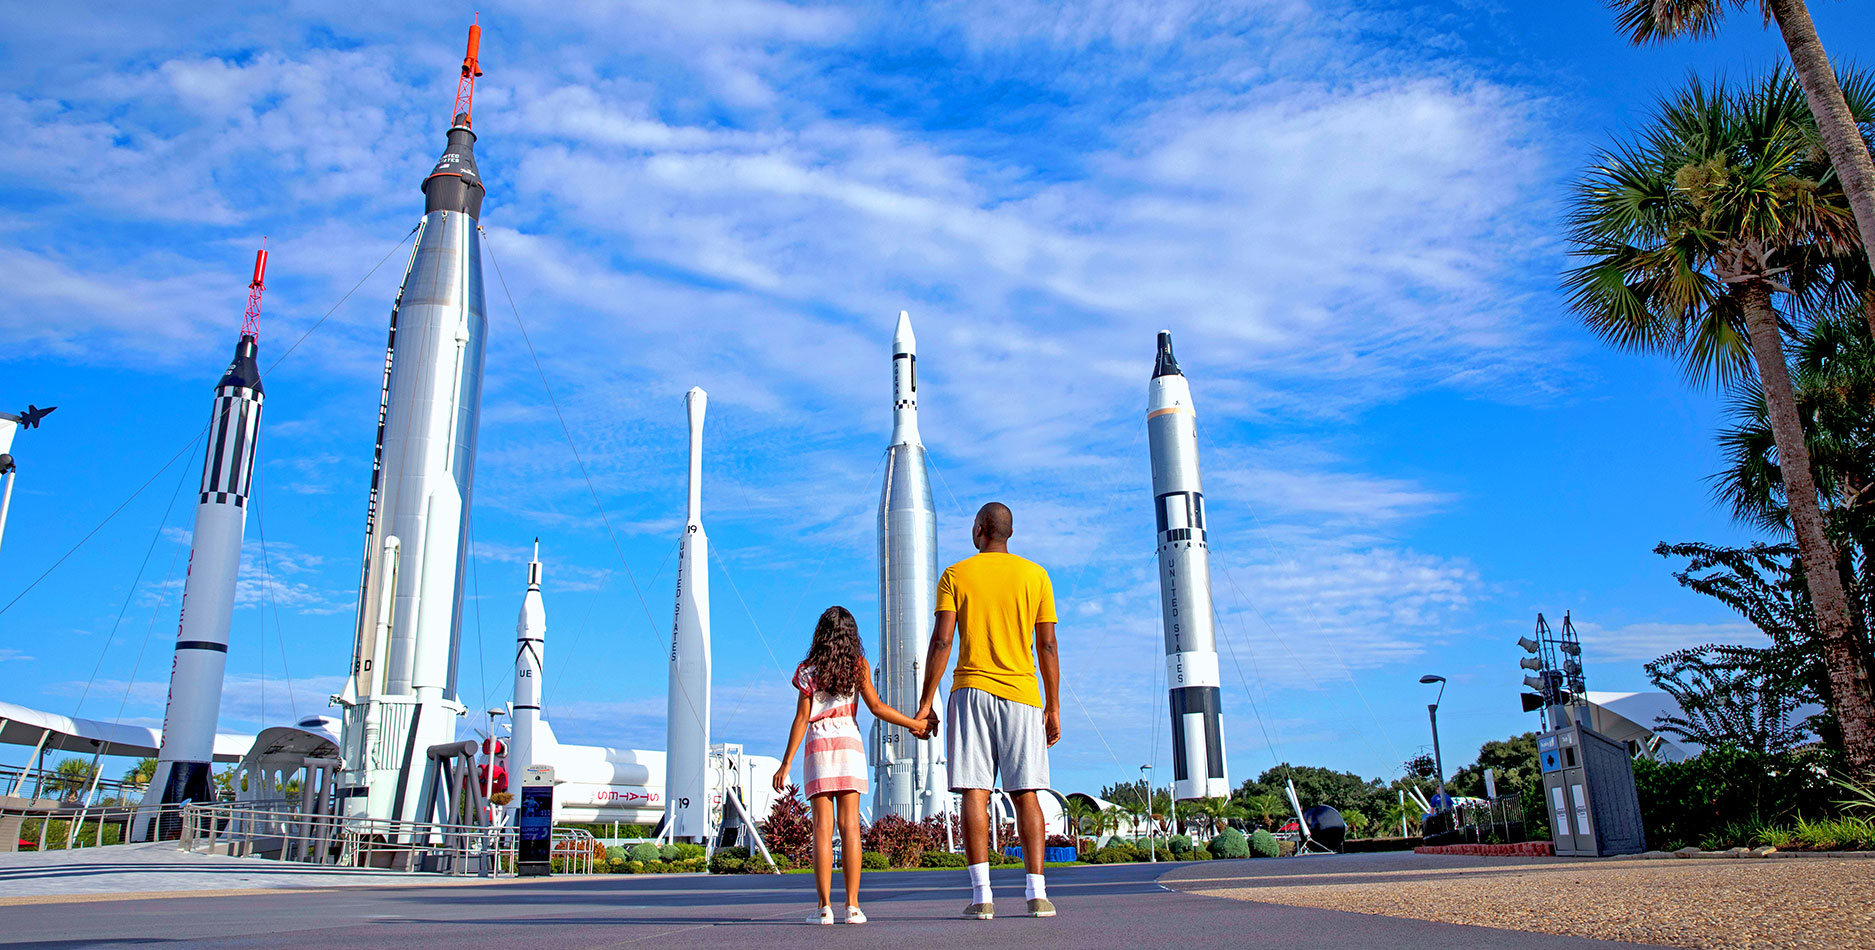 Father and daughter look up at the Rocket Garden at the Kennedy Space Center Visitor Complex where Rockets launch and inspiration begins.